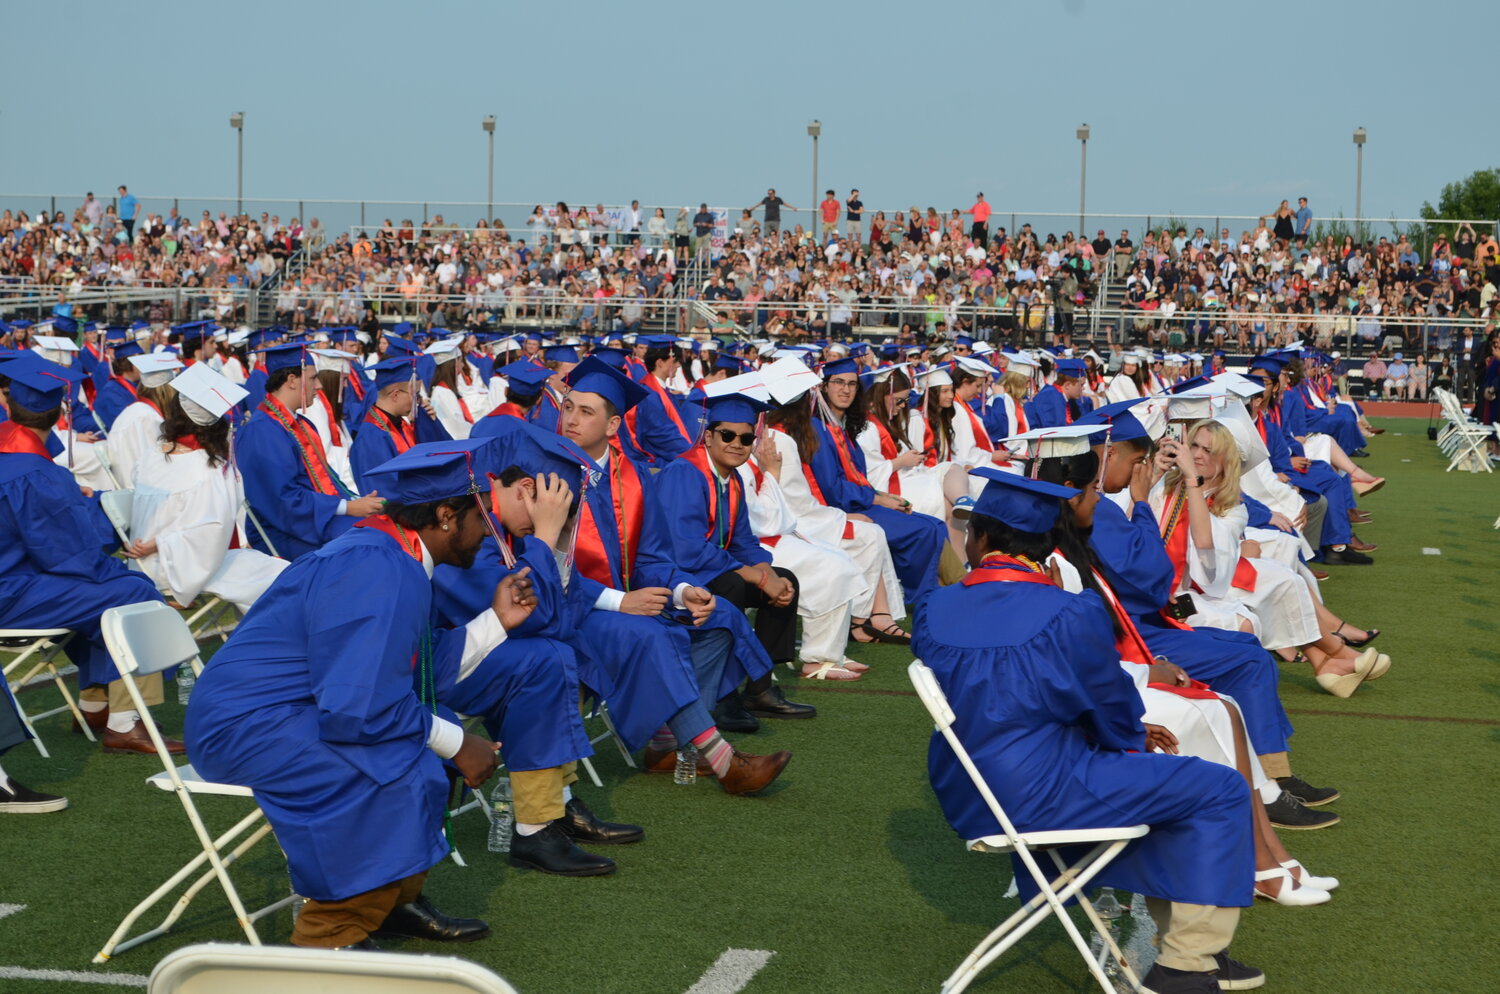 Central Bucks High School East graduates take their seats at the start of their commencement ceremony on June 14.